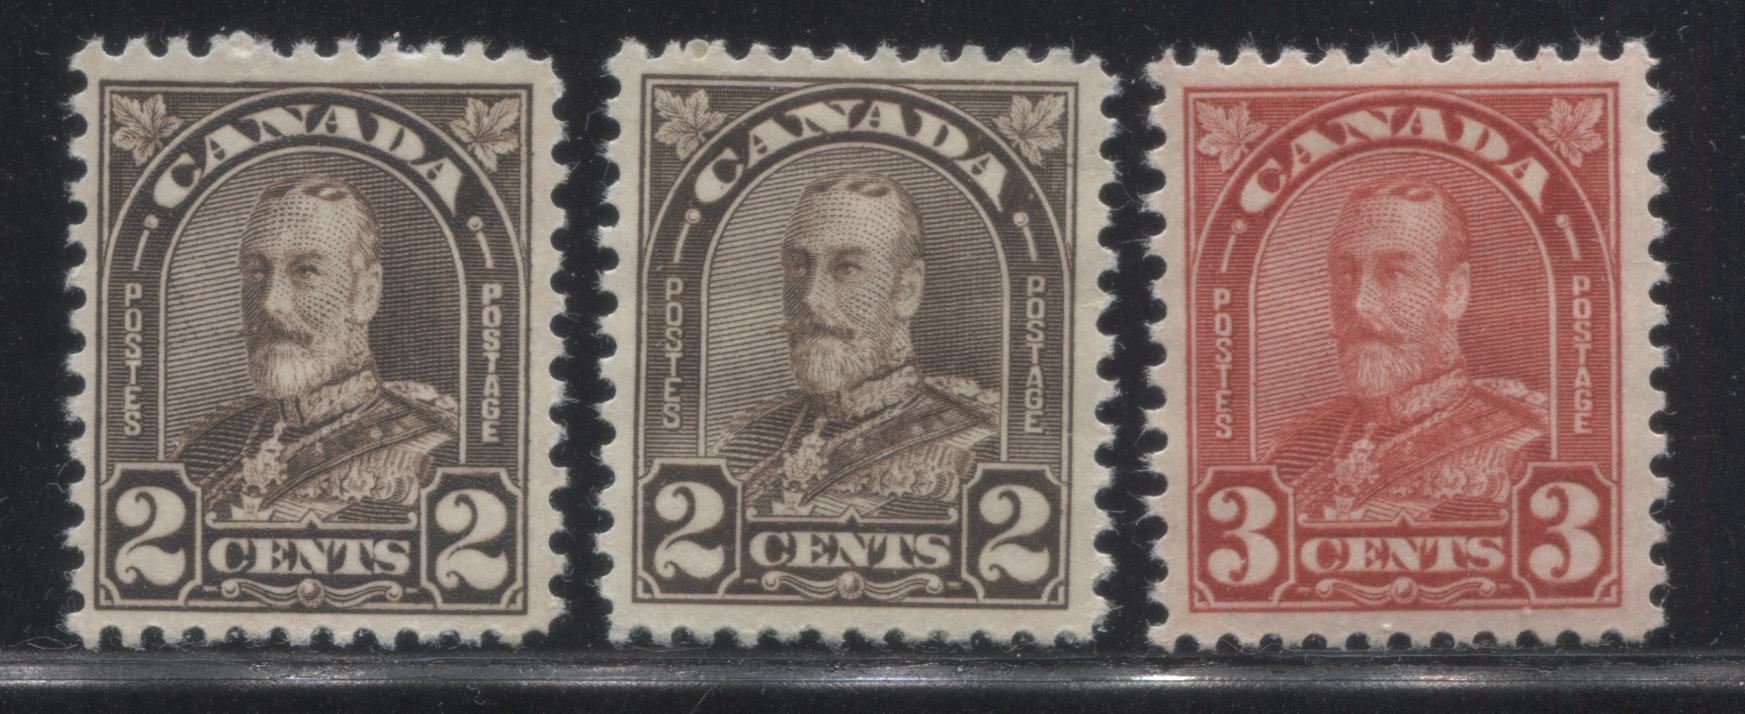 Canada #166-167 2c Blackish Brown & 3c Scarlet King George V, 1930-1935 Arch Issue, Three Very Fine Mint Singles, Including Both Dies of the 2c Blackish Brown Brixton Chrome 